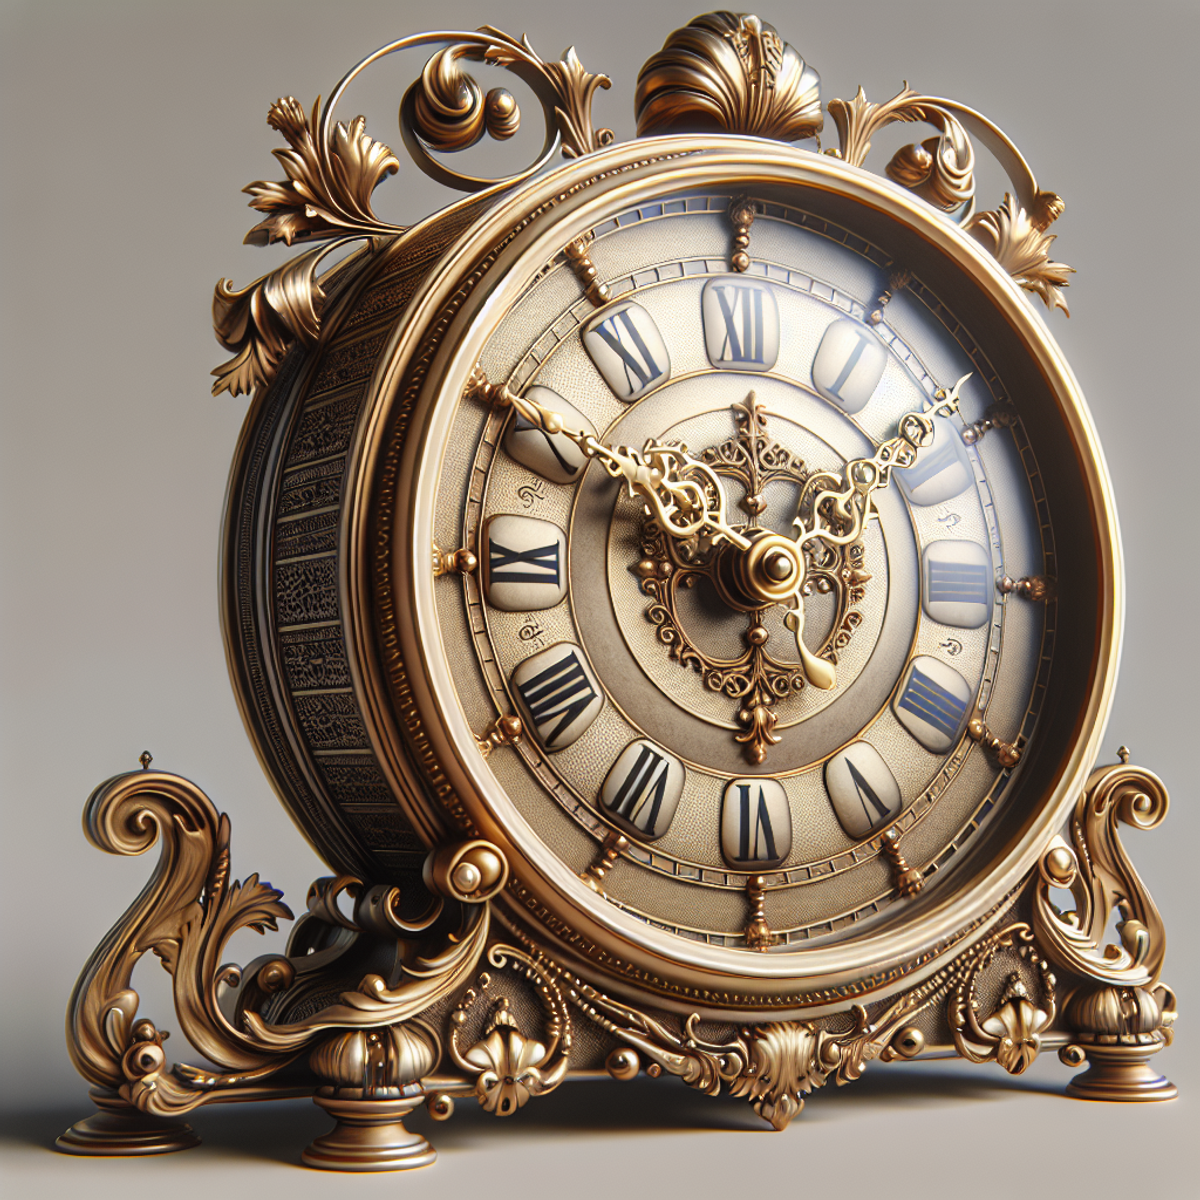 Antique Time Pieces Such As Mantle Clocks, Wrist-watches, and pocket watches are prime for getting appraised and insured.